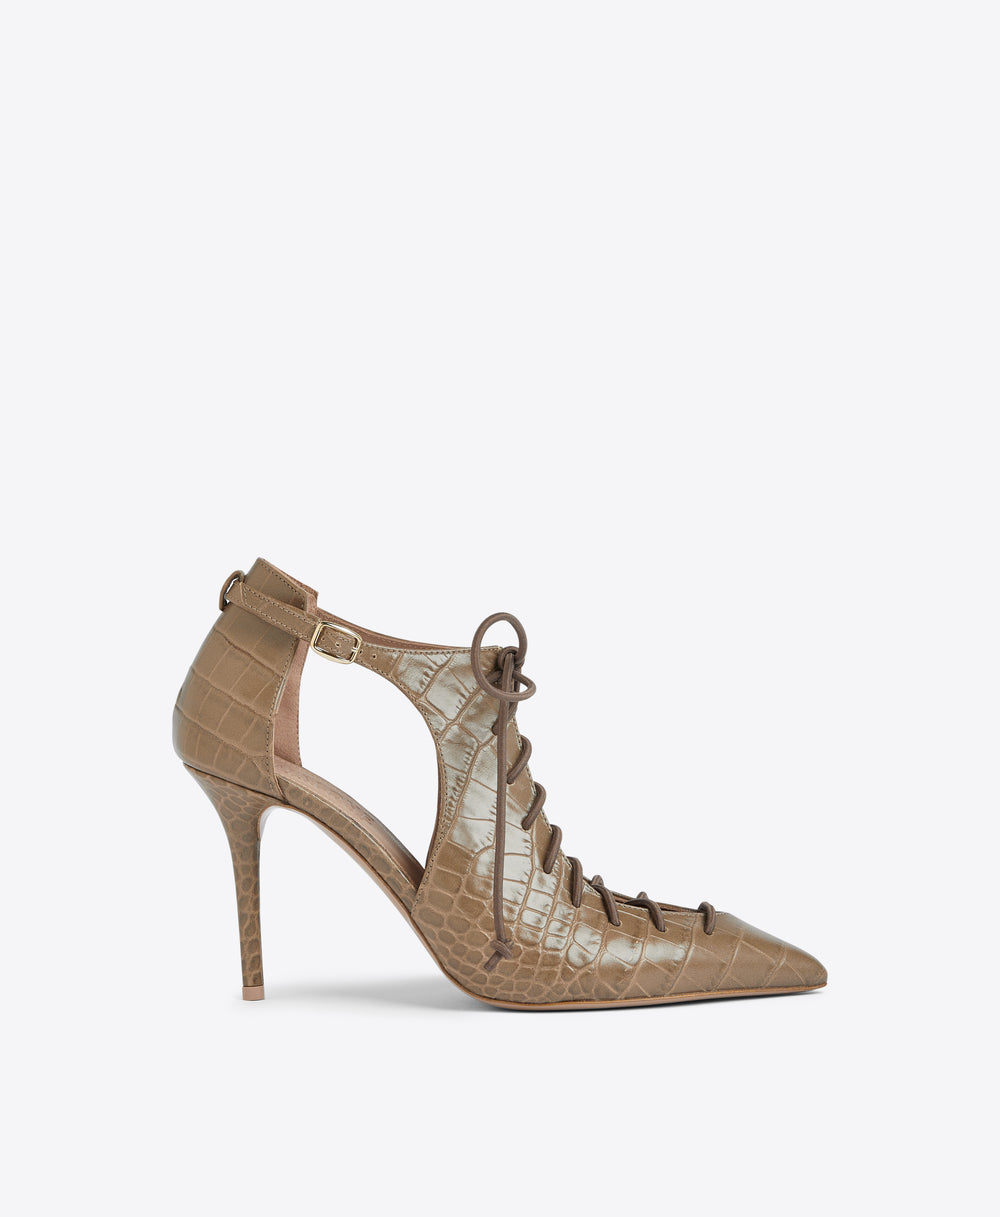 Malone Souliers Montana 85 Taupe Embossed Leather Pumps